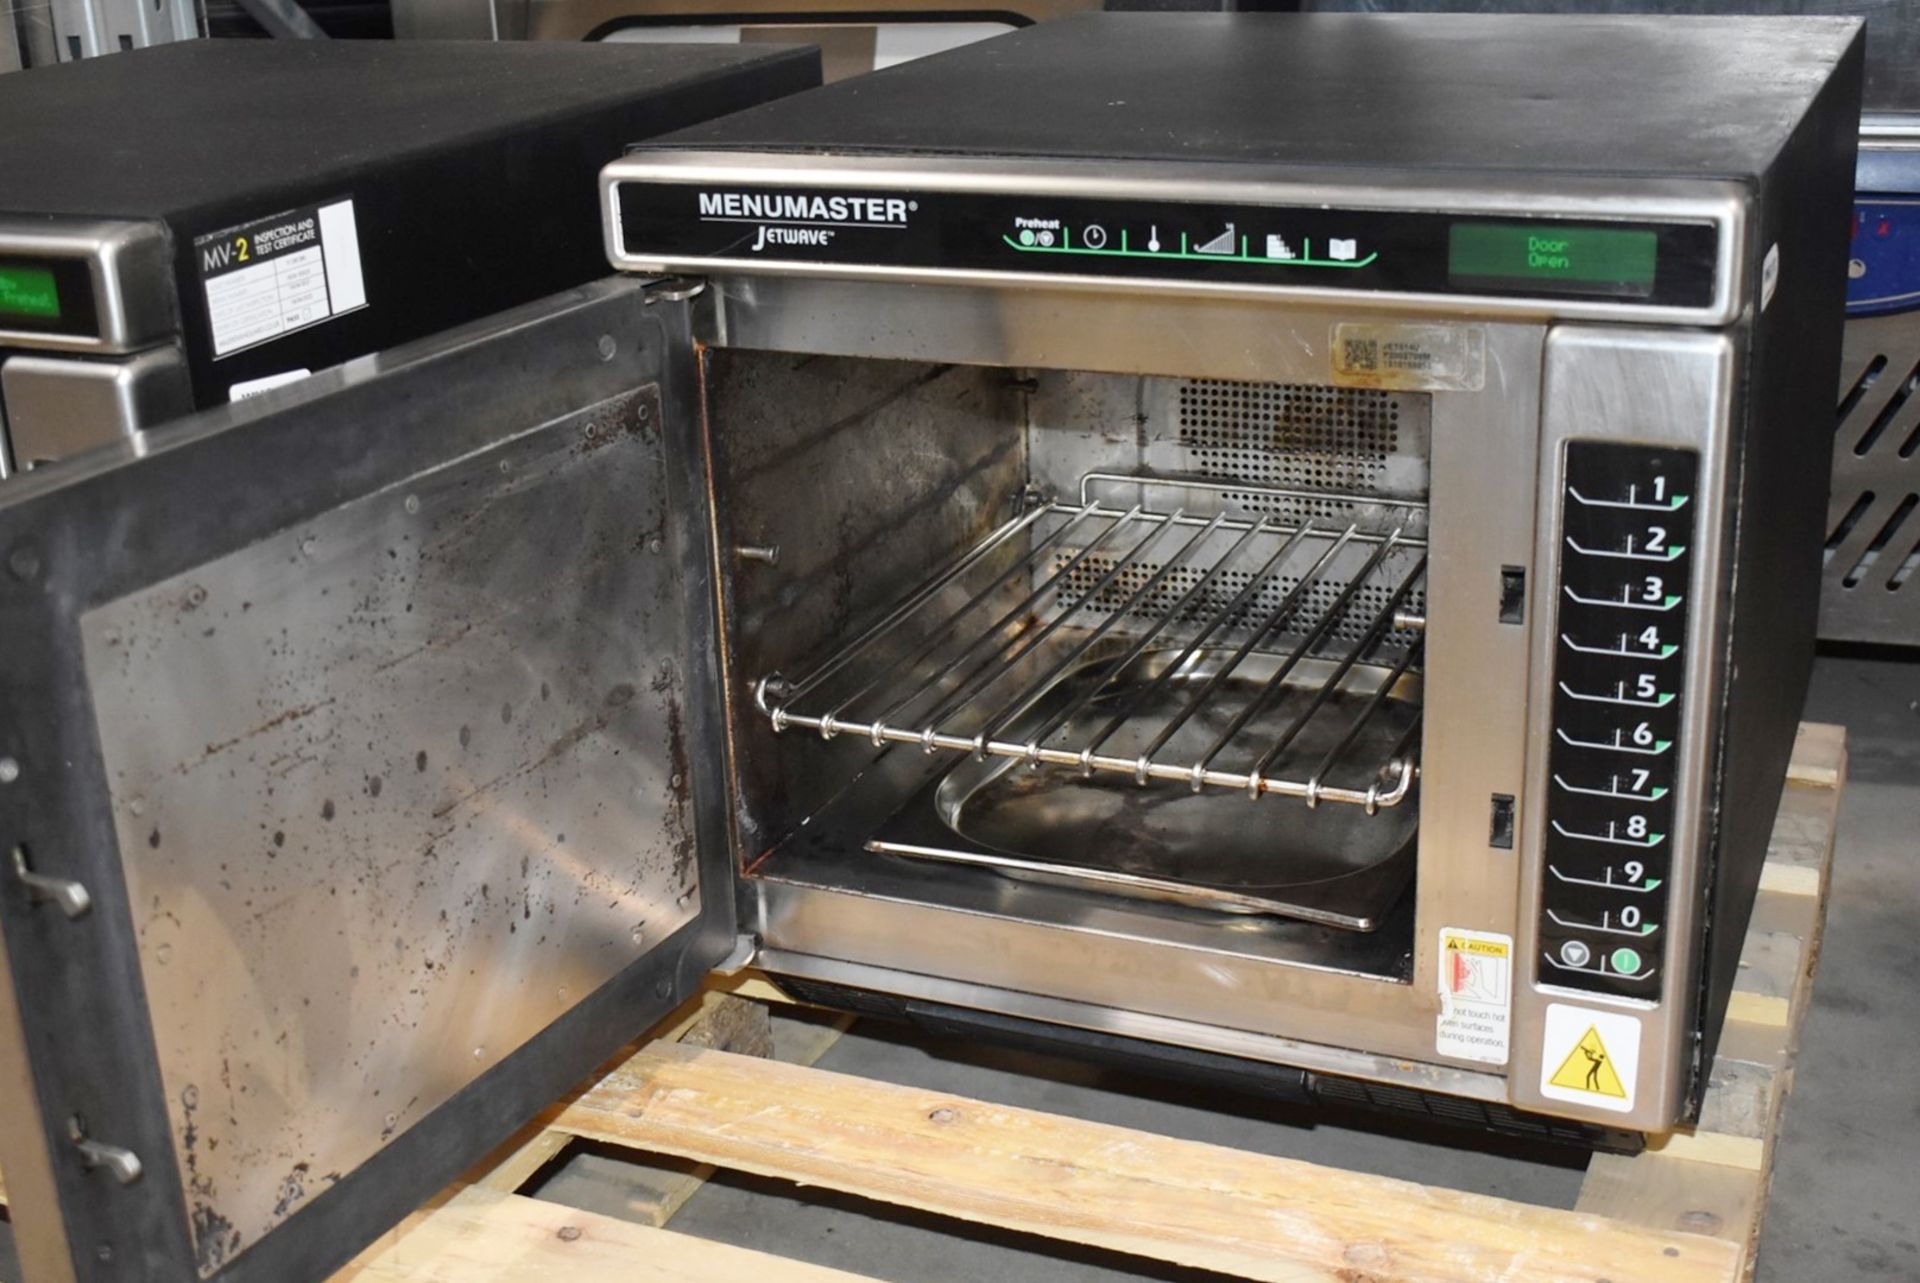 1 x Menumaster Jetwave JET514U High Speed Combination Microwave Oven - RRP £2,400 - Recently Removed - Image 8 of 11